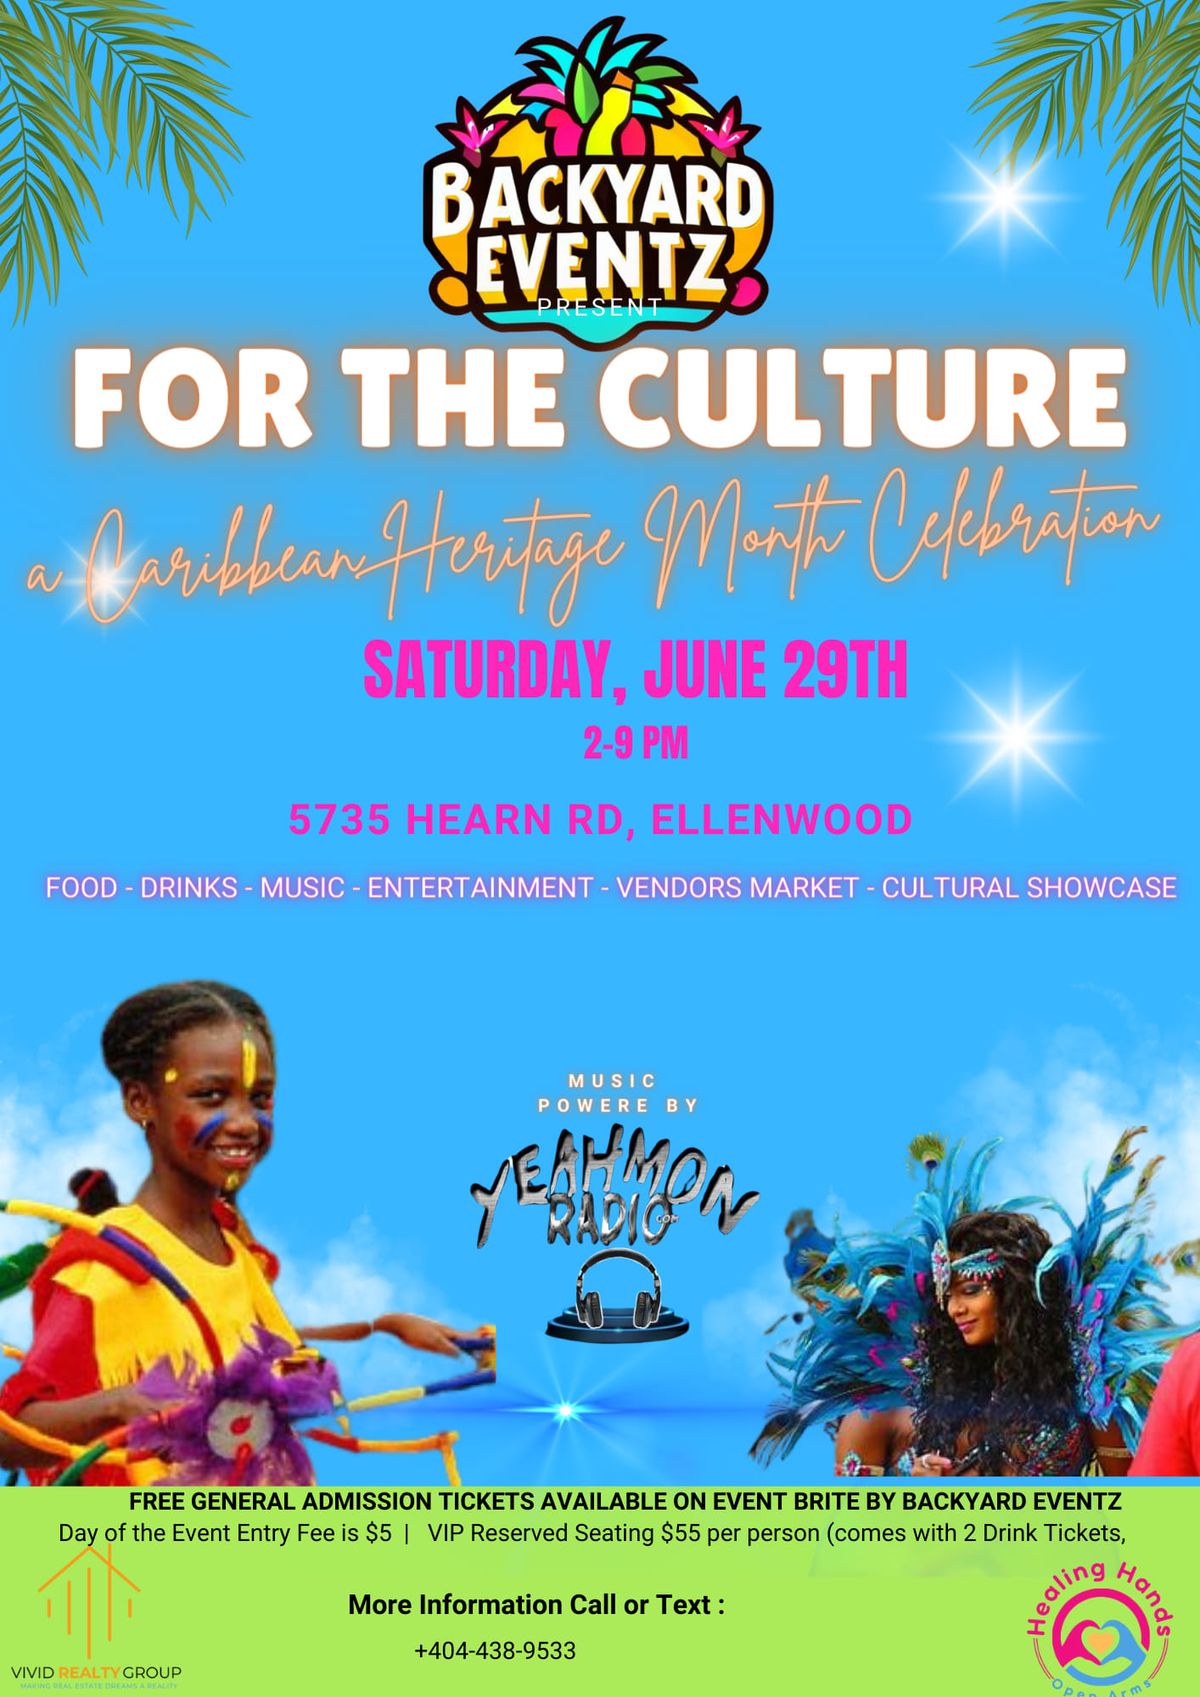 Backyard Eventz- For The Culture Caribbean American Heritage Month Celebration 